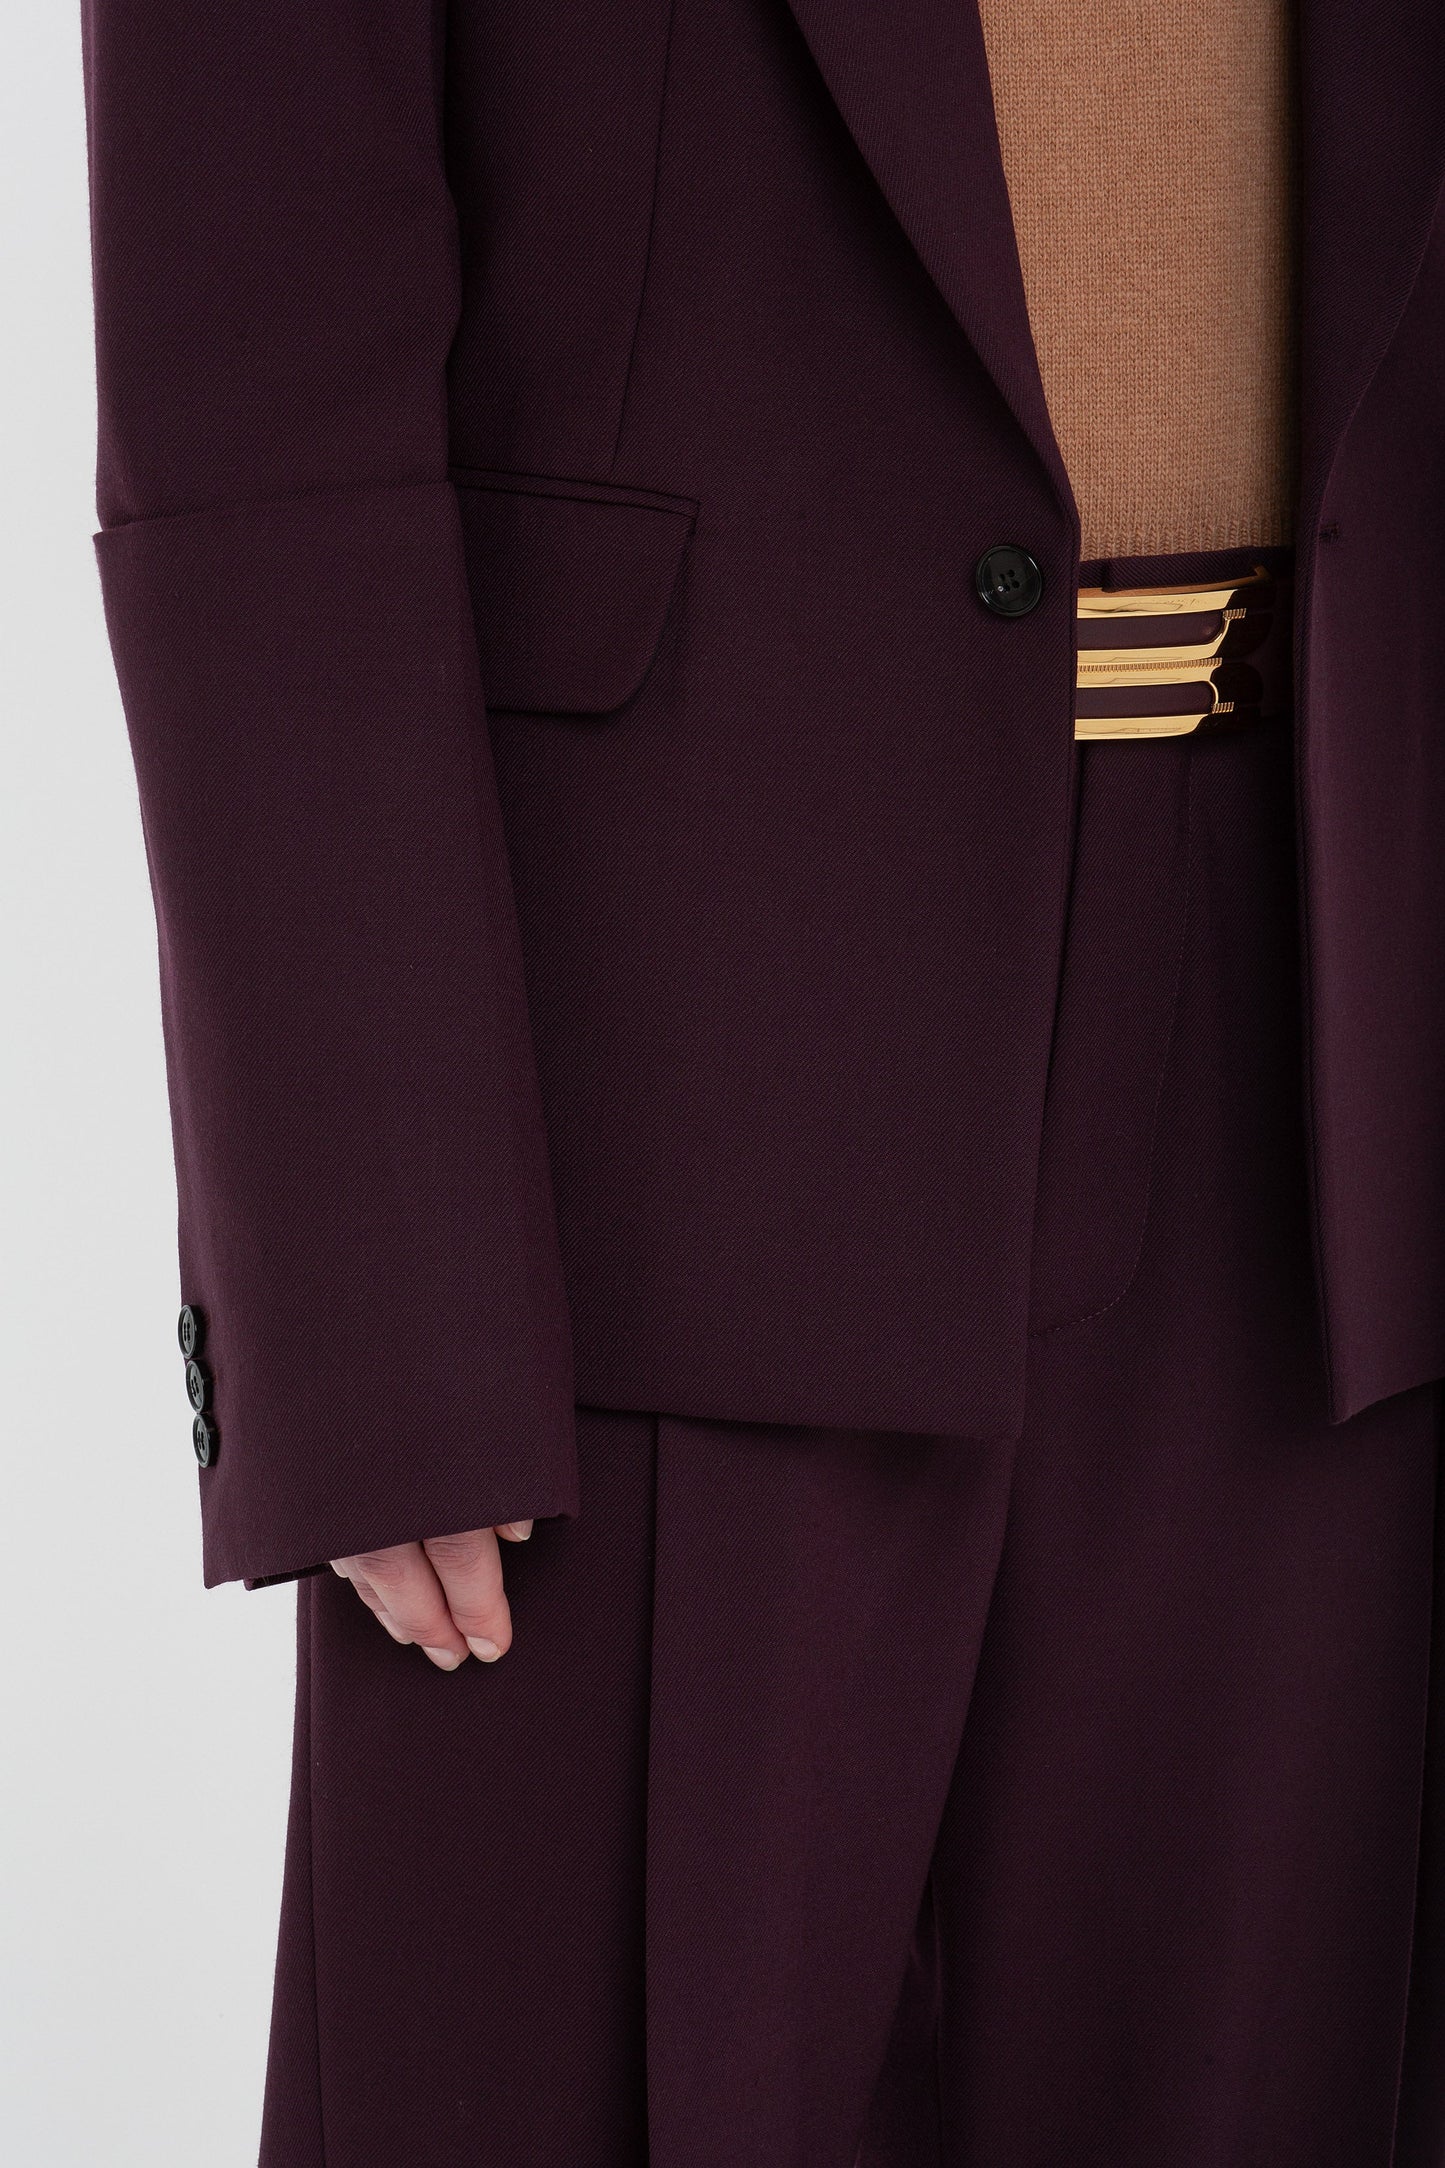 Close-up of a person wearing a Sleeve Detail Patch Pocket Jacket In Deep Mahogany by Victoria Beckham, tan shirt, and maroon trousers with a unique triple-striped belt.